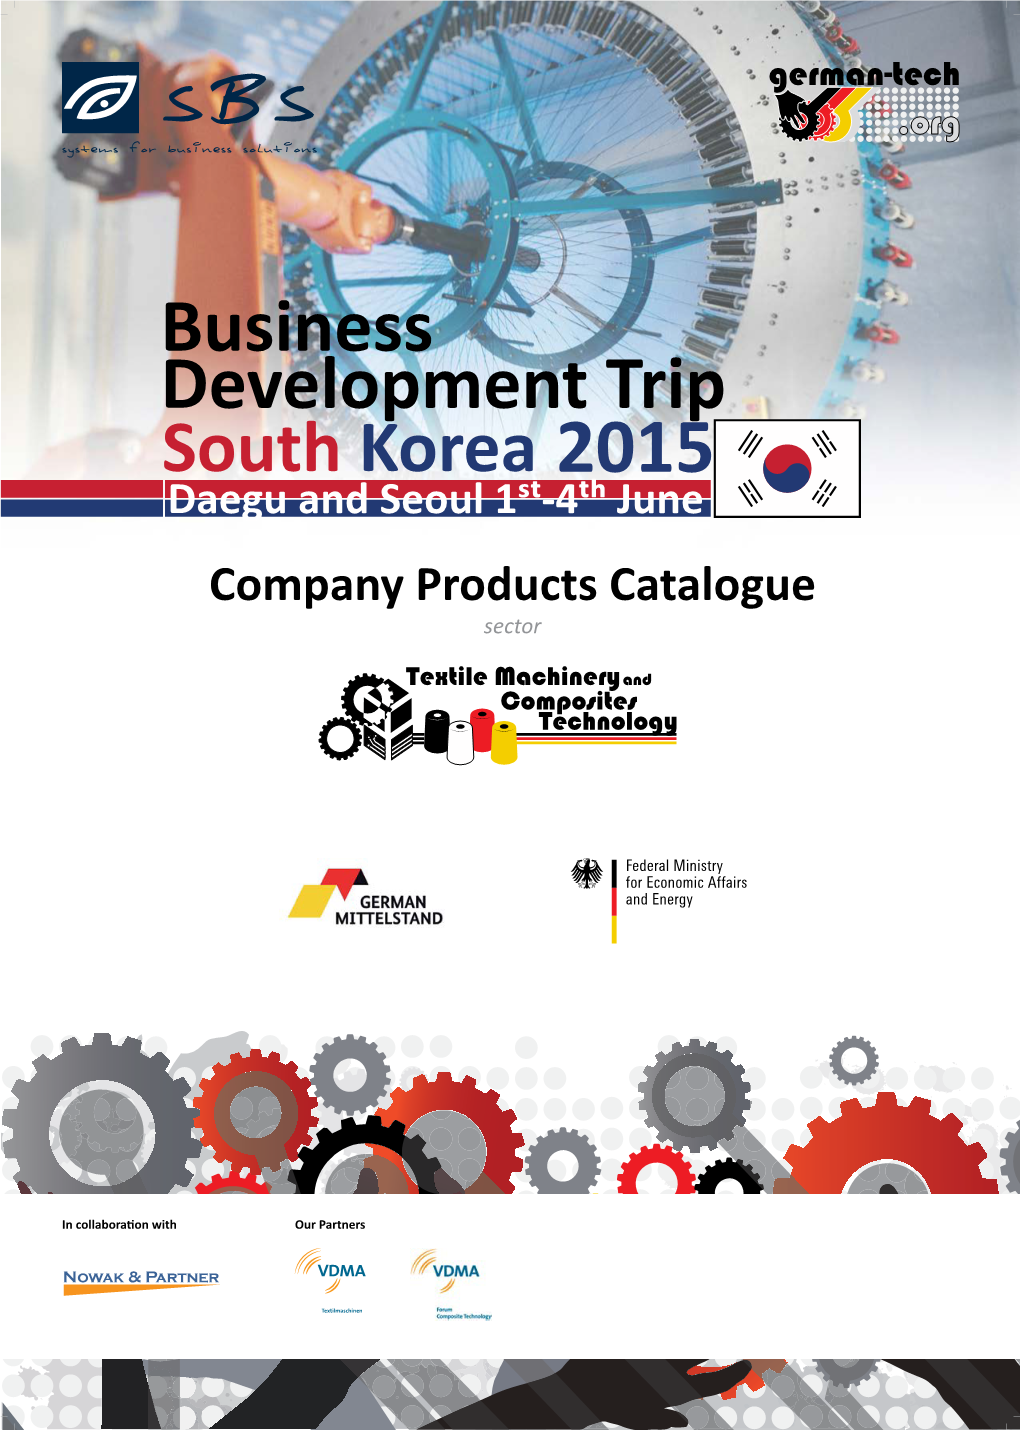 Company Products Catalogue Sector